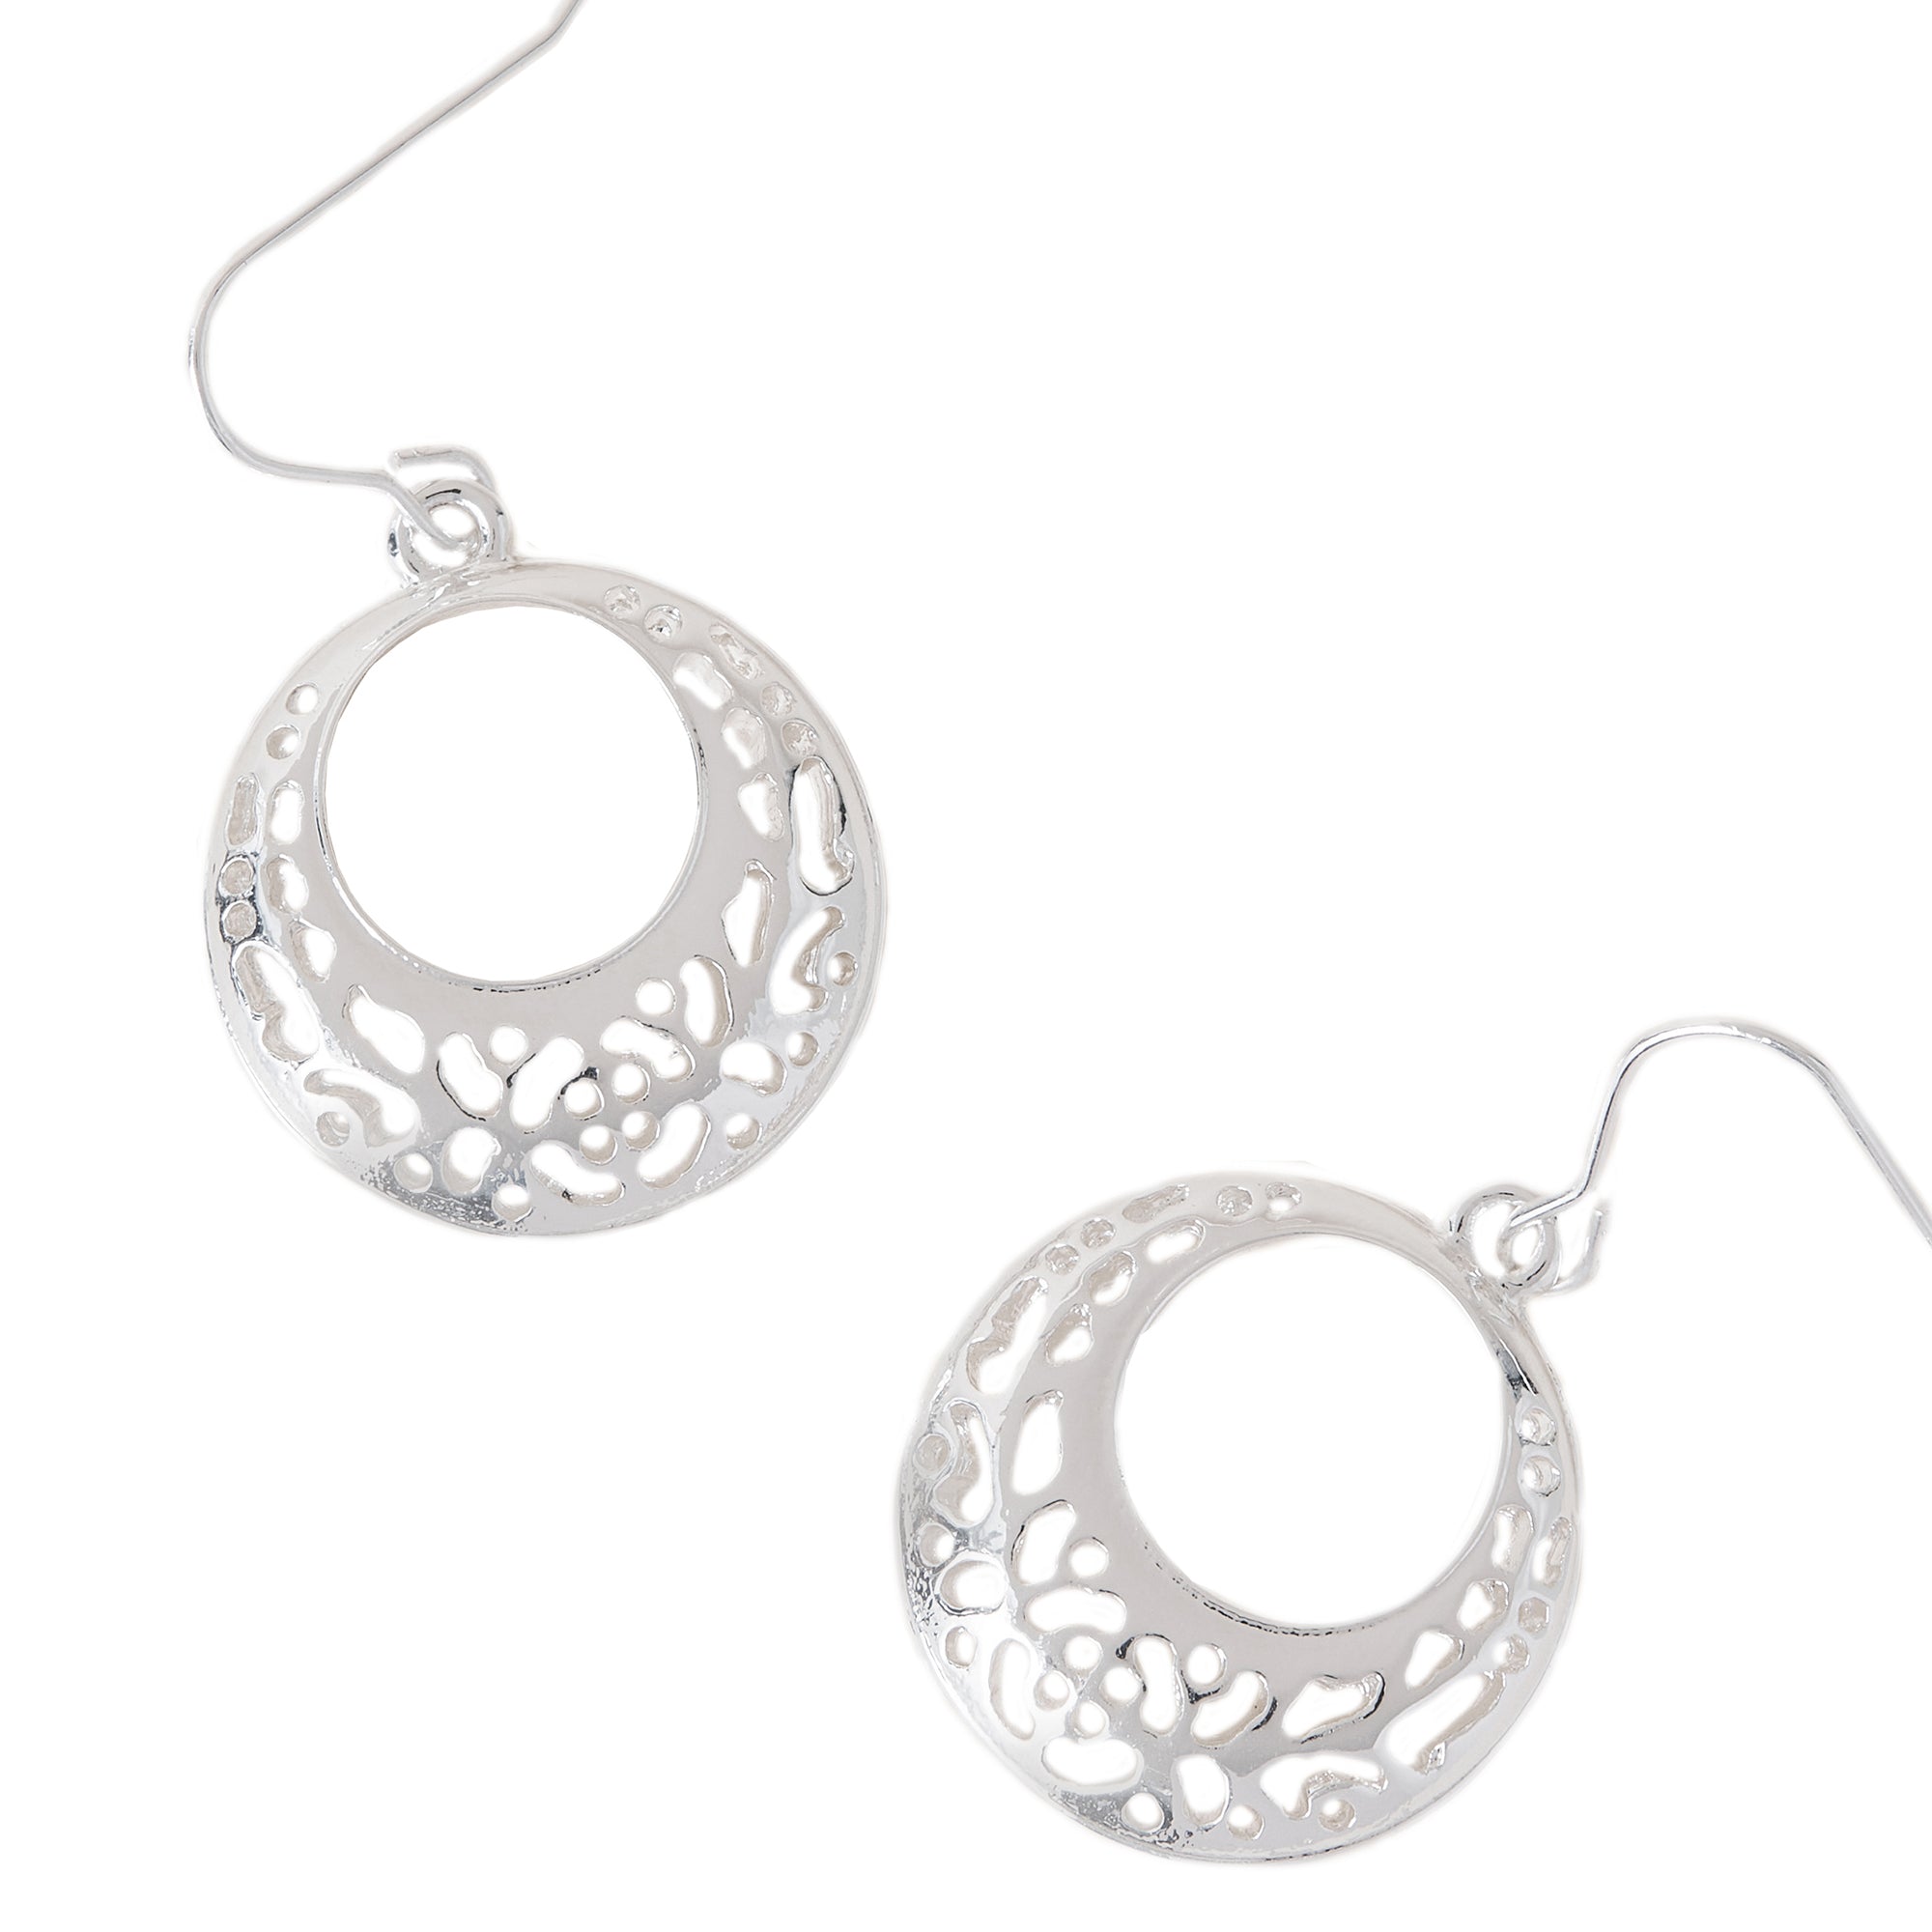 Buy Silver Round Studs with Silver Round Hanging Earrings - MH0238